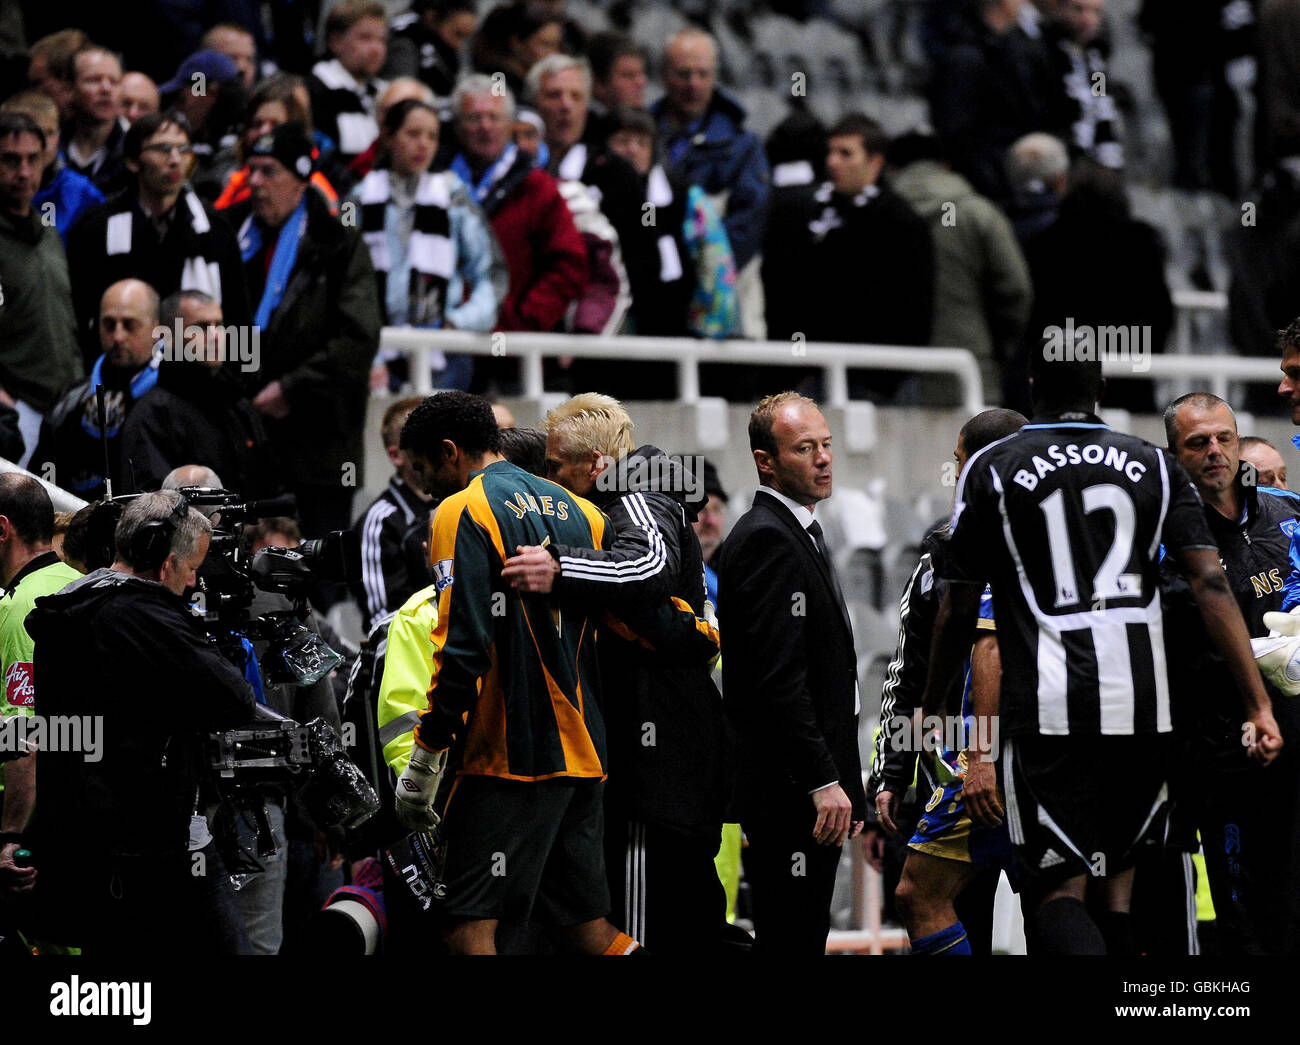 Newcastle United Manager Alan Shearer at the end of the game after the Barclays Premier League match at St James' Park, Newcastle. Stock Photo